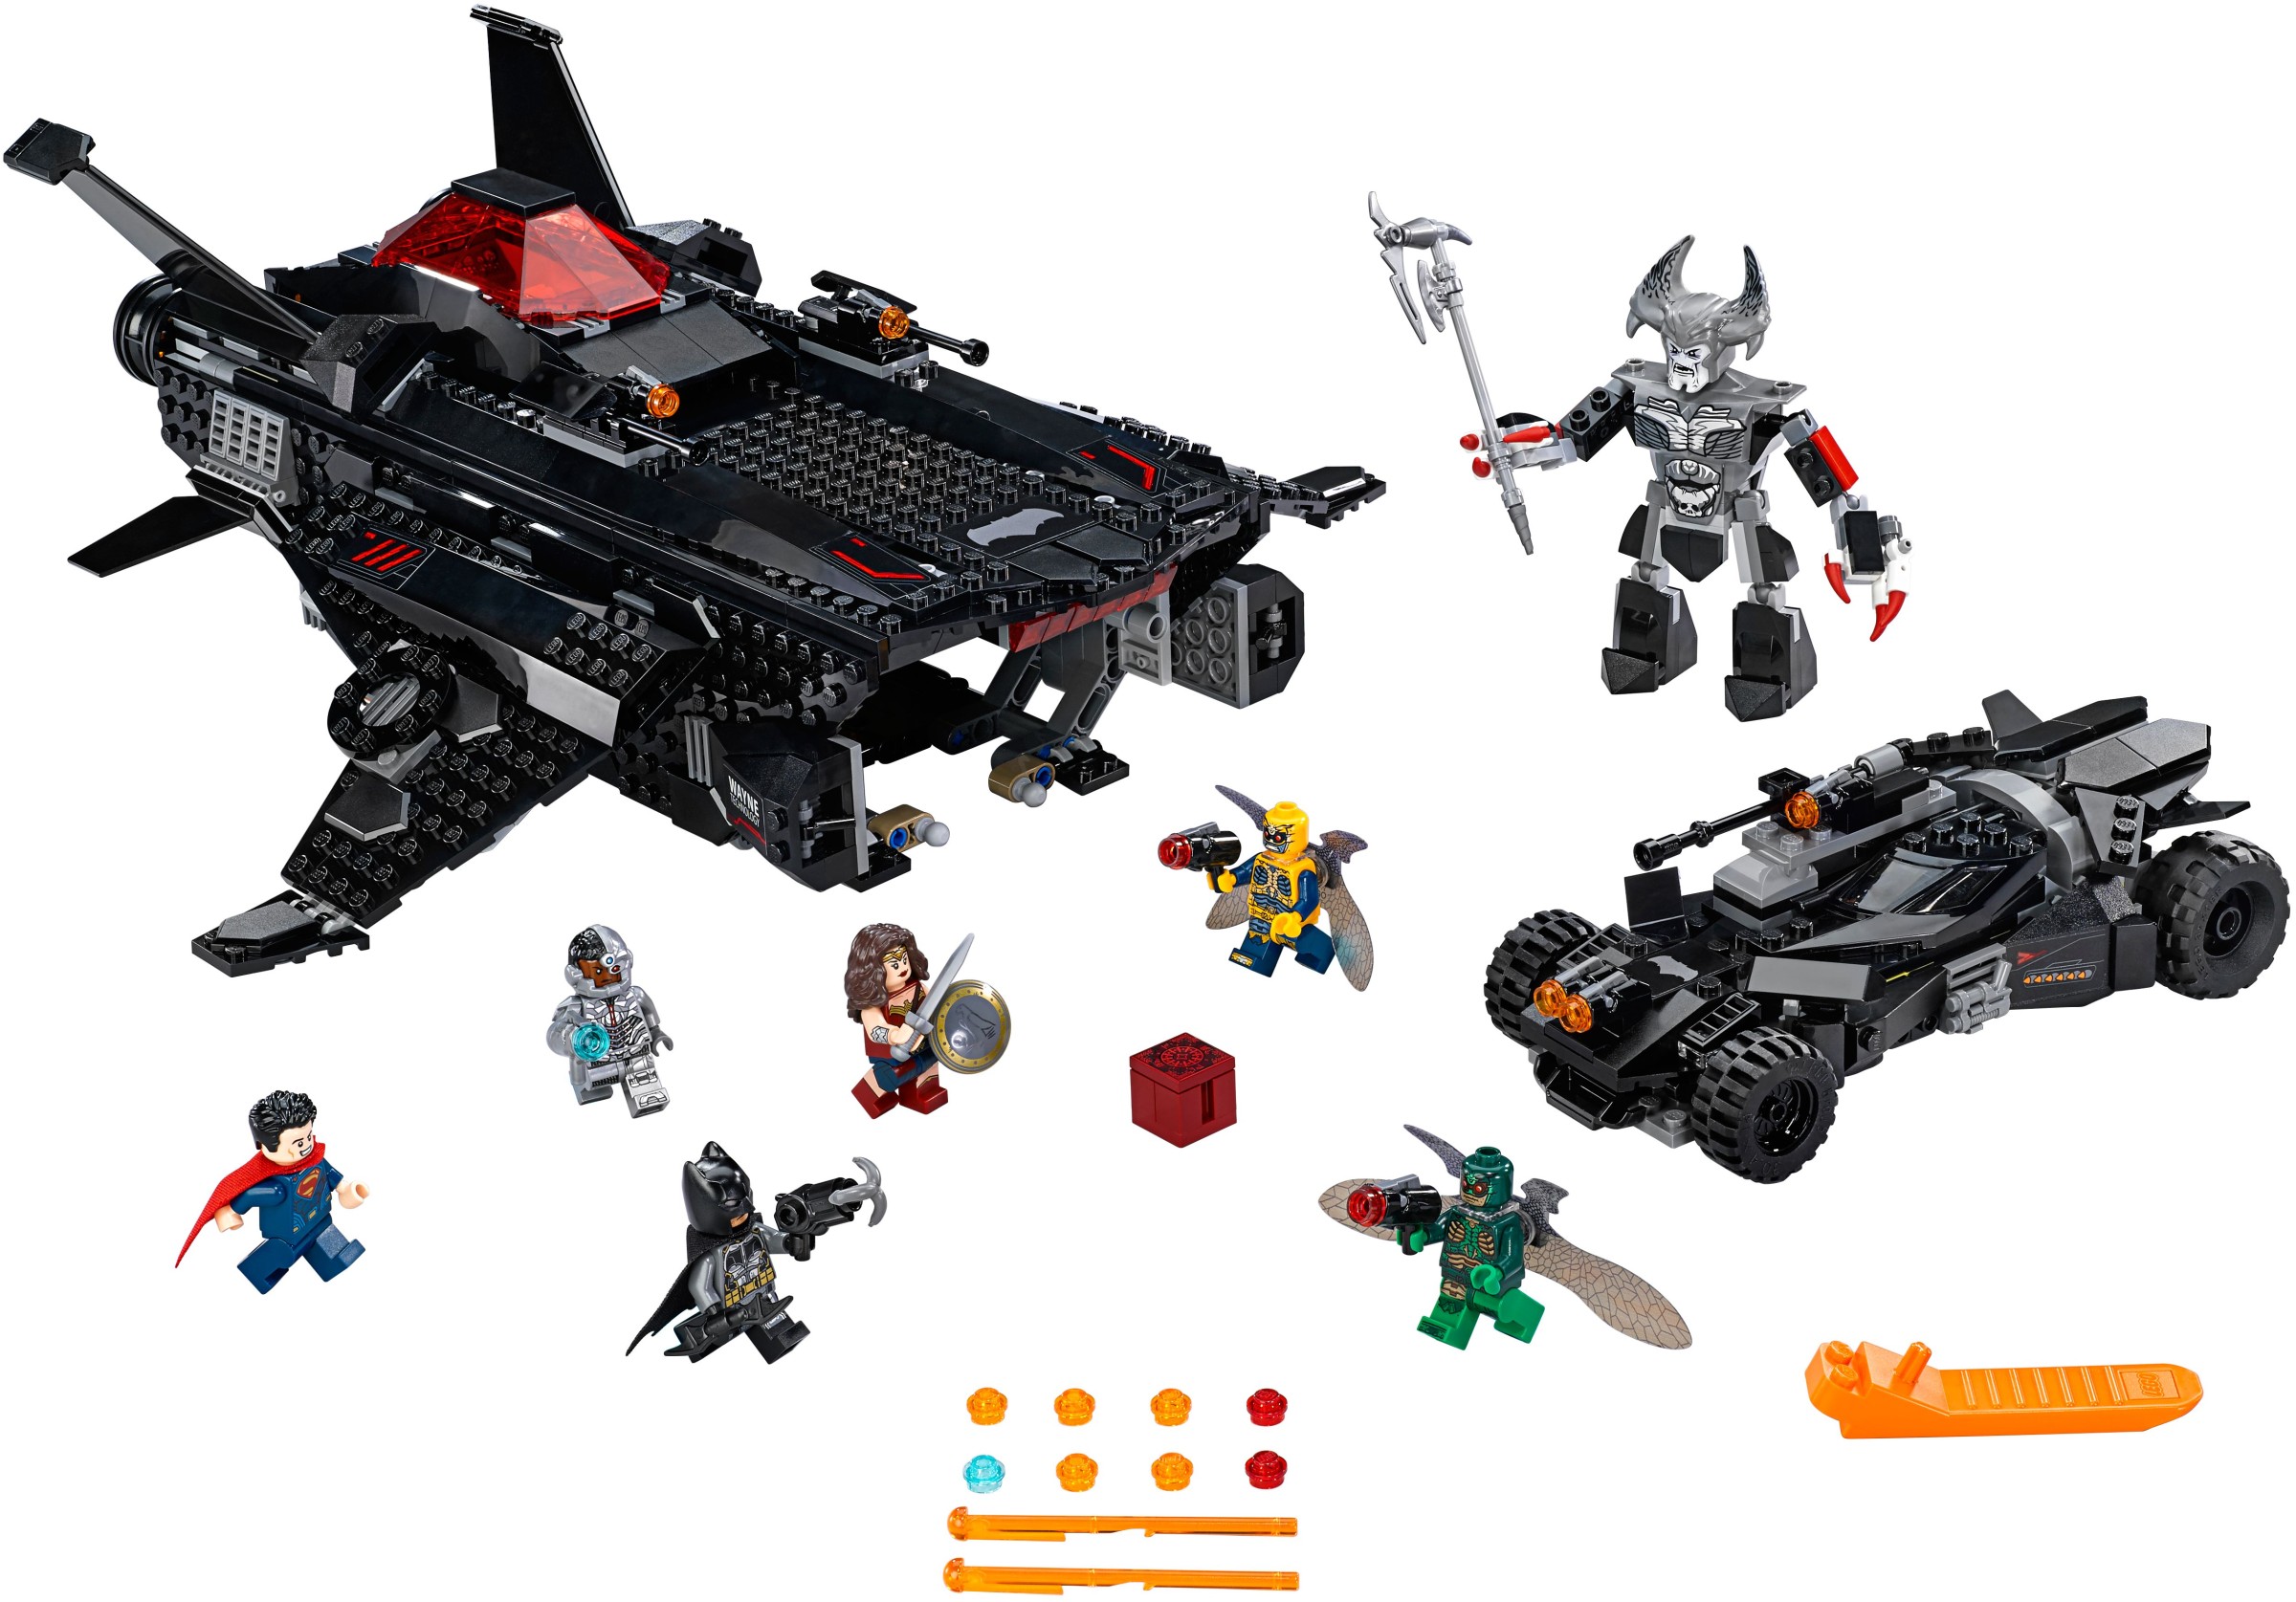 NEW LEGO CYBORG FROM SET 76087 JUSTICE LEAGUE sh436 